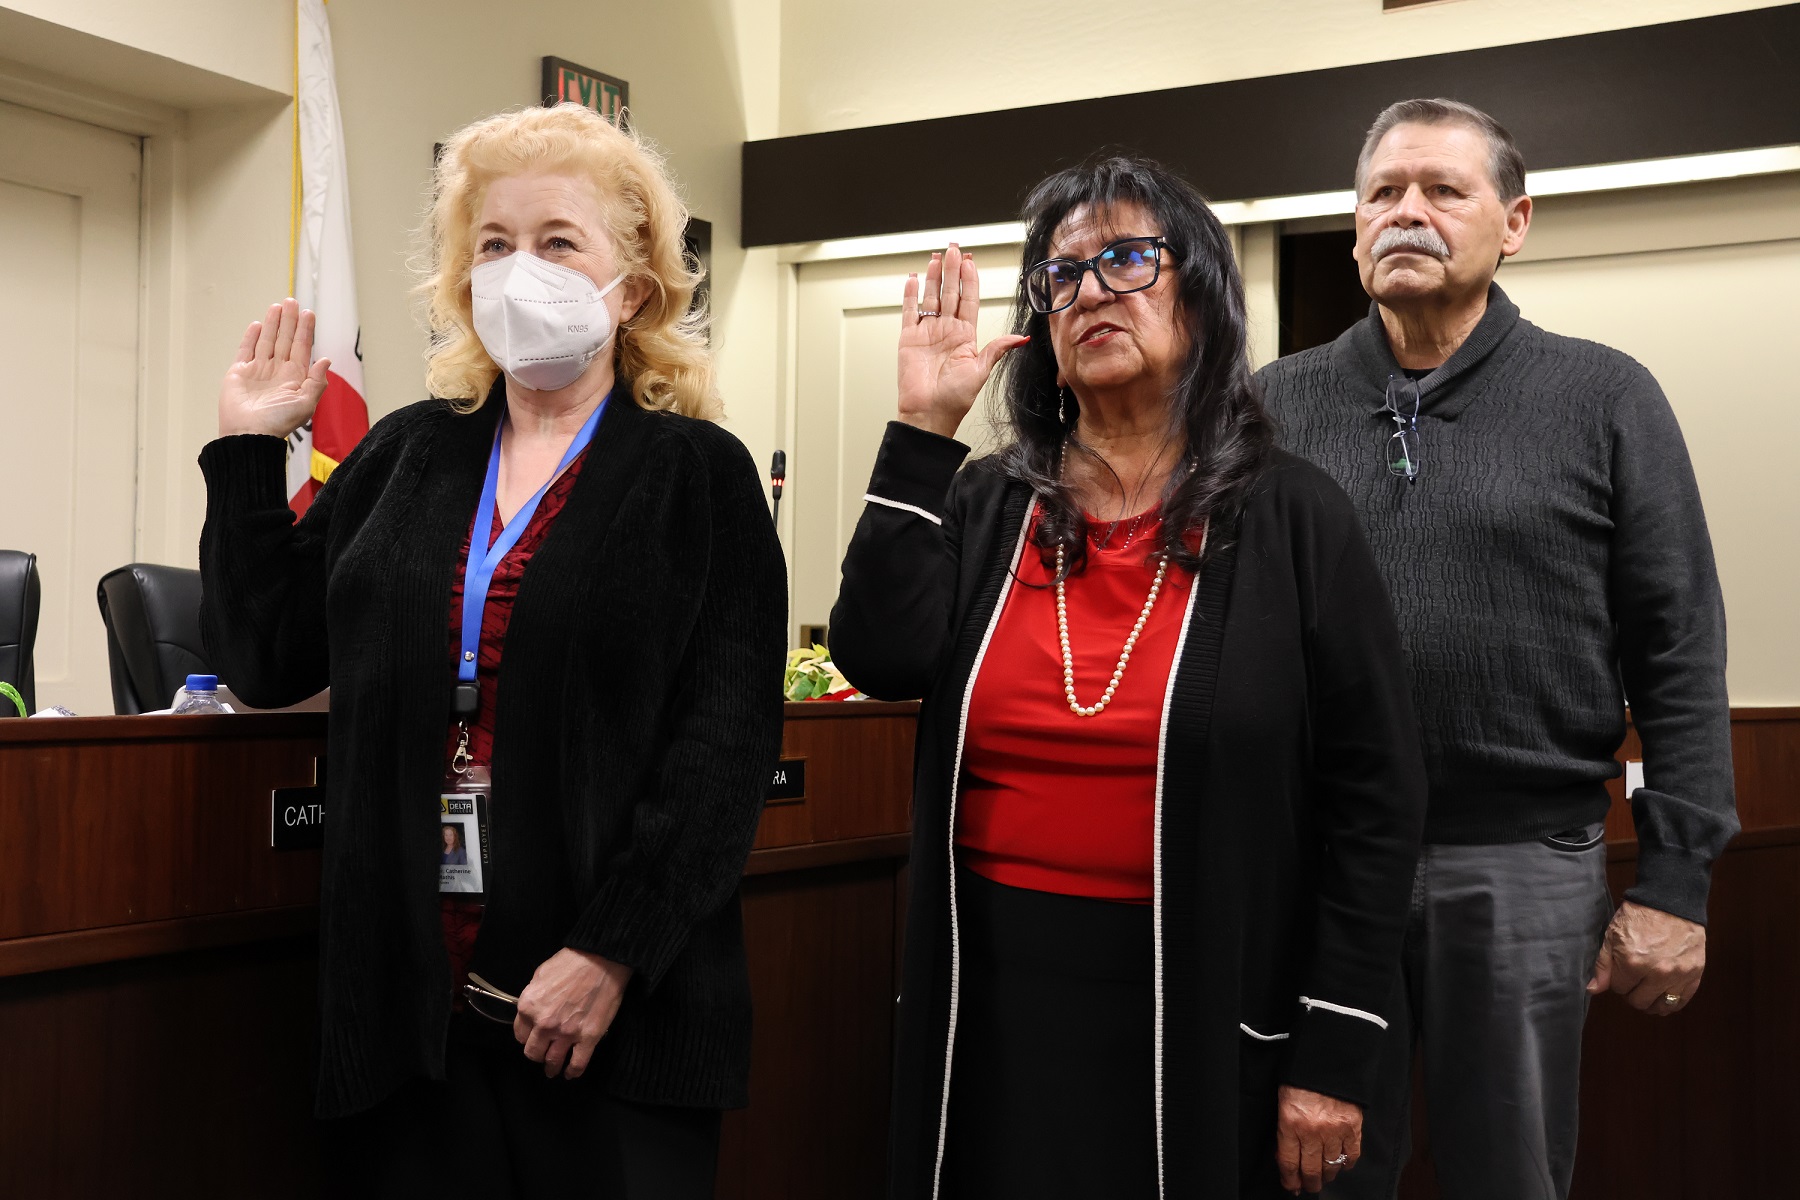 Trustees Catherine Mathis and Janet Rivera take the oath as Trustee Rivera's husband, Rupert, looks on